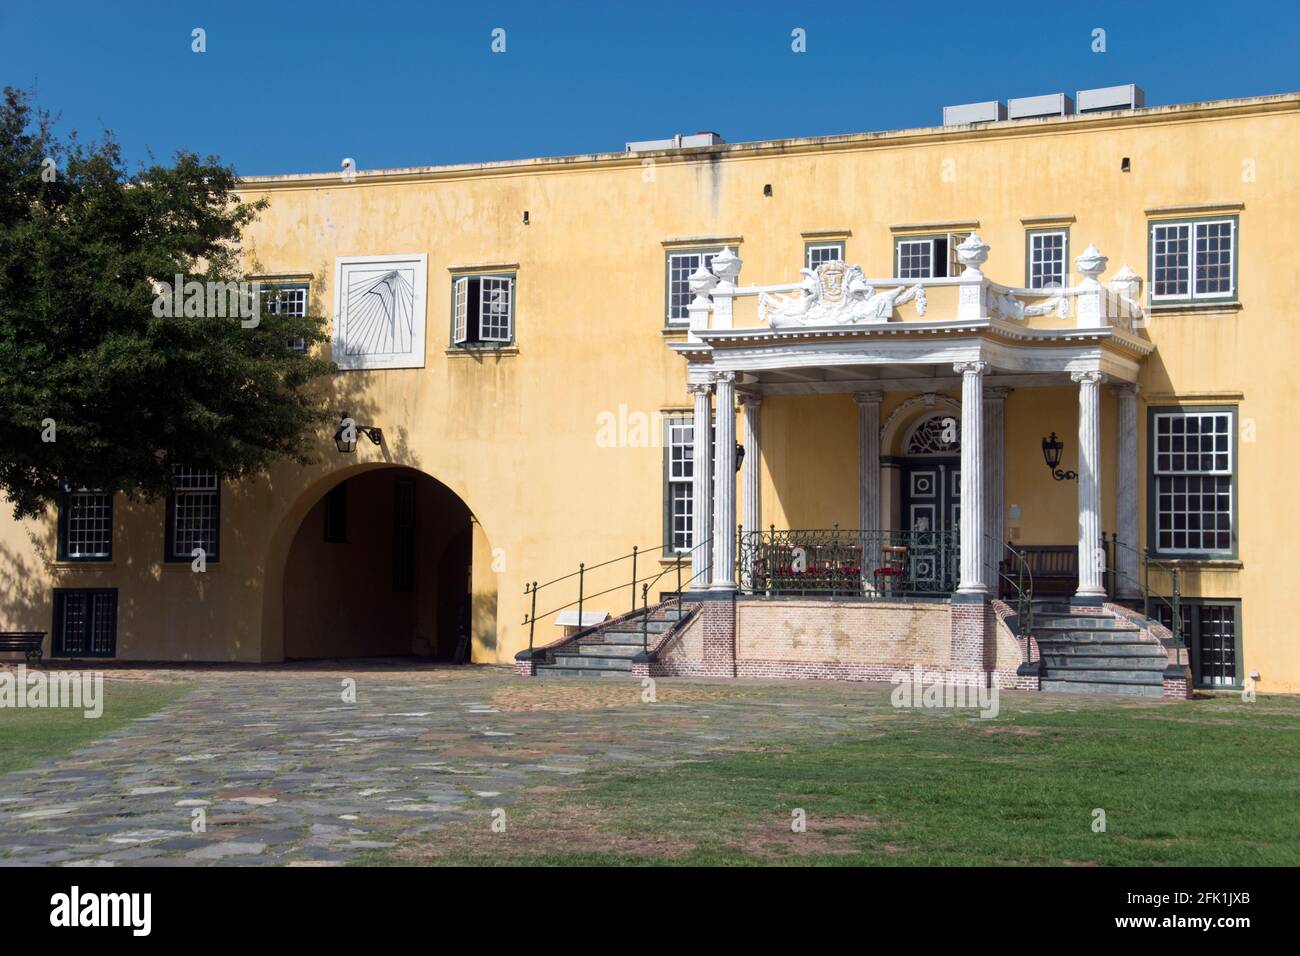 The courtyard of the Castle of Good Hope, a fort built by the Dutch East India Company (1666-1679) at Cape Town, South Africa. Stock Photo